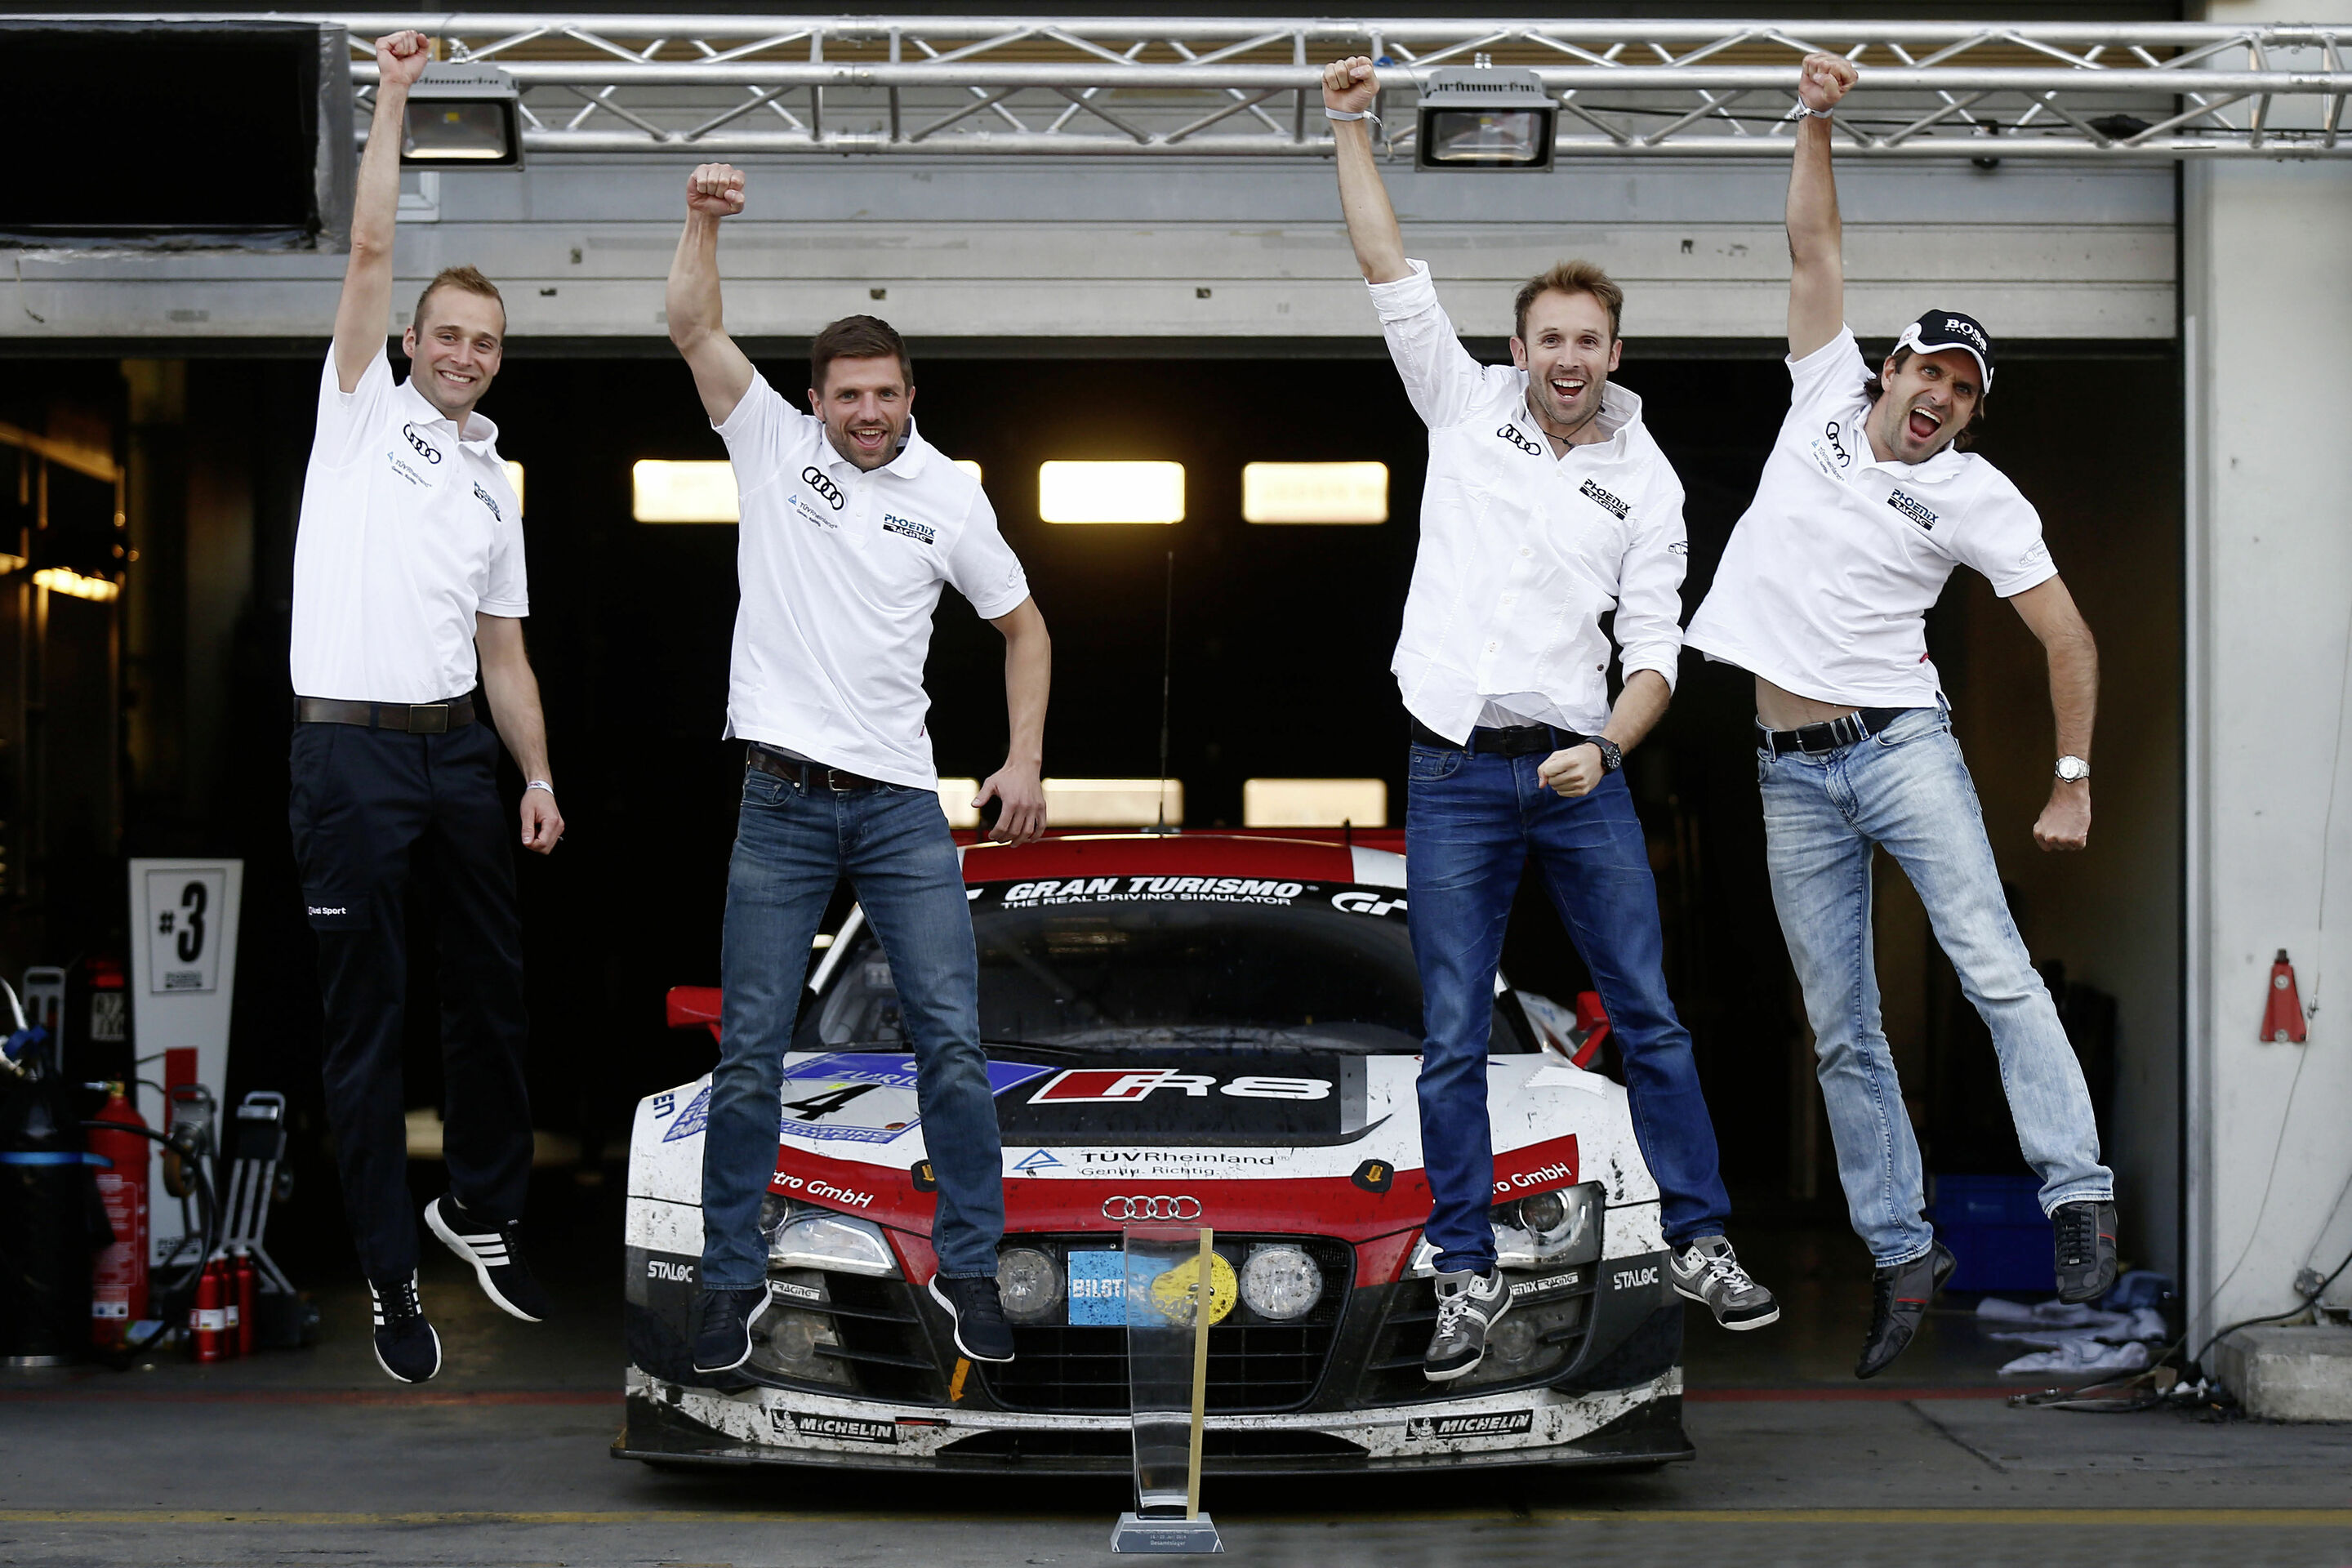 Facts on the victory of Audi in the Nürburgring 24 Hours